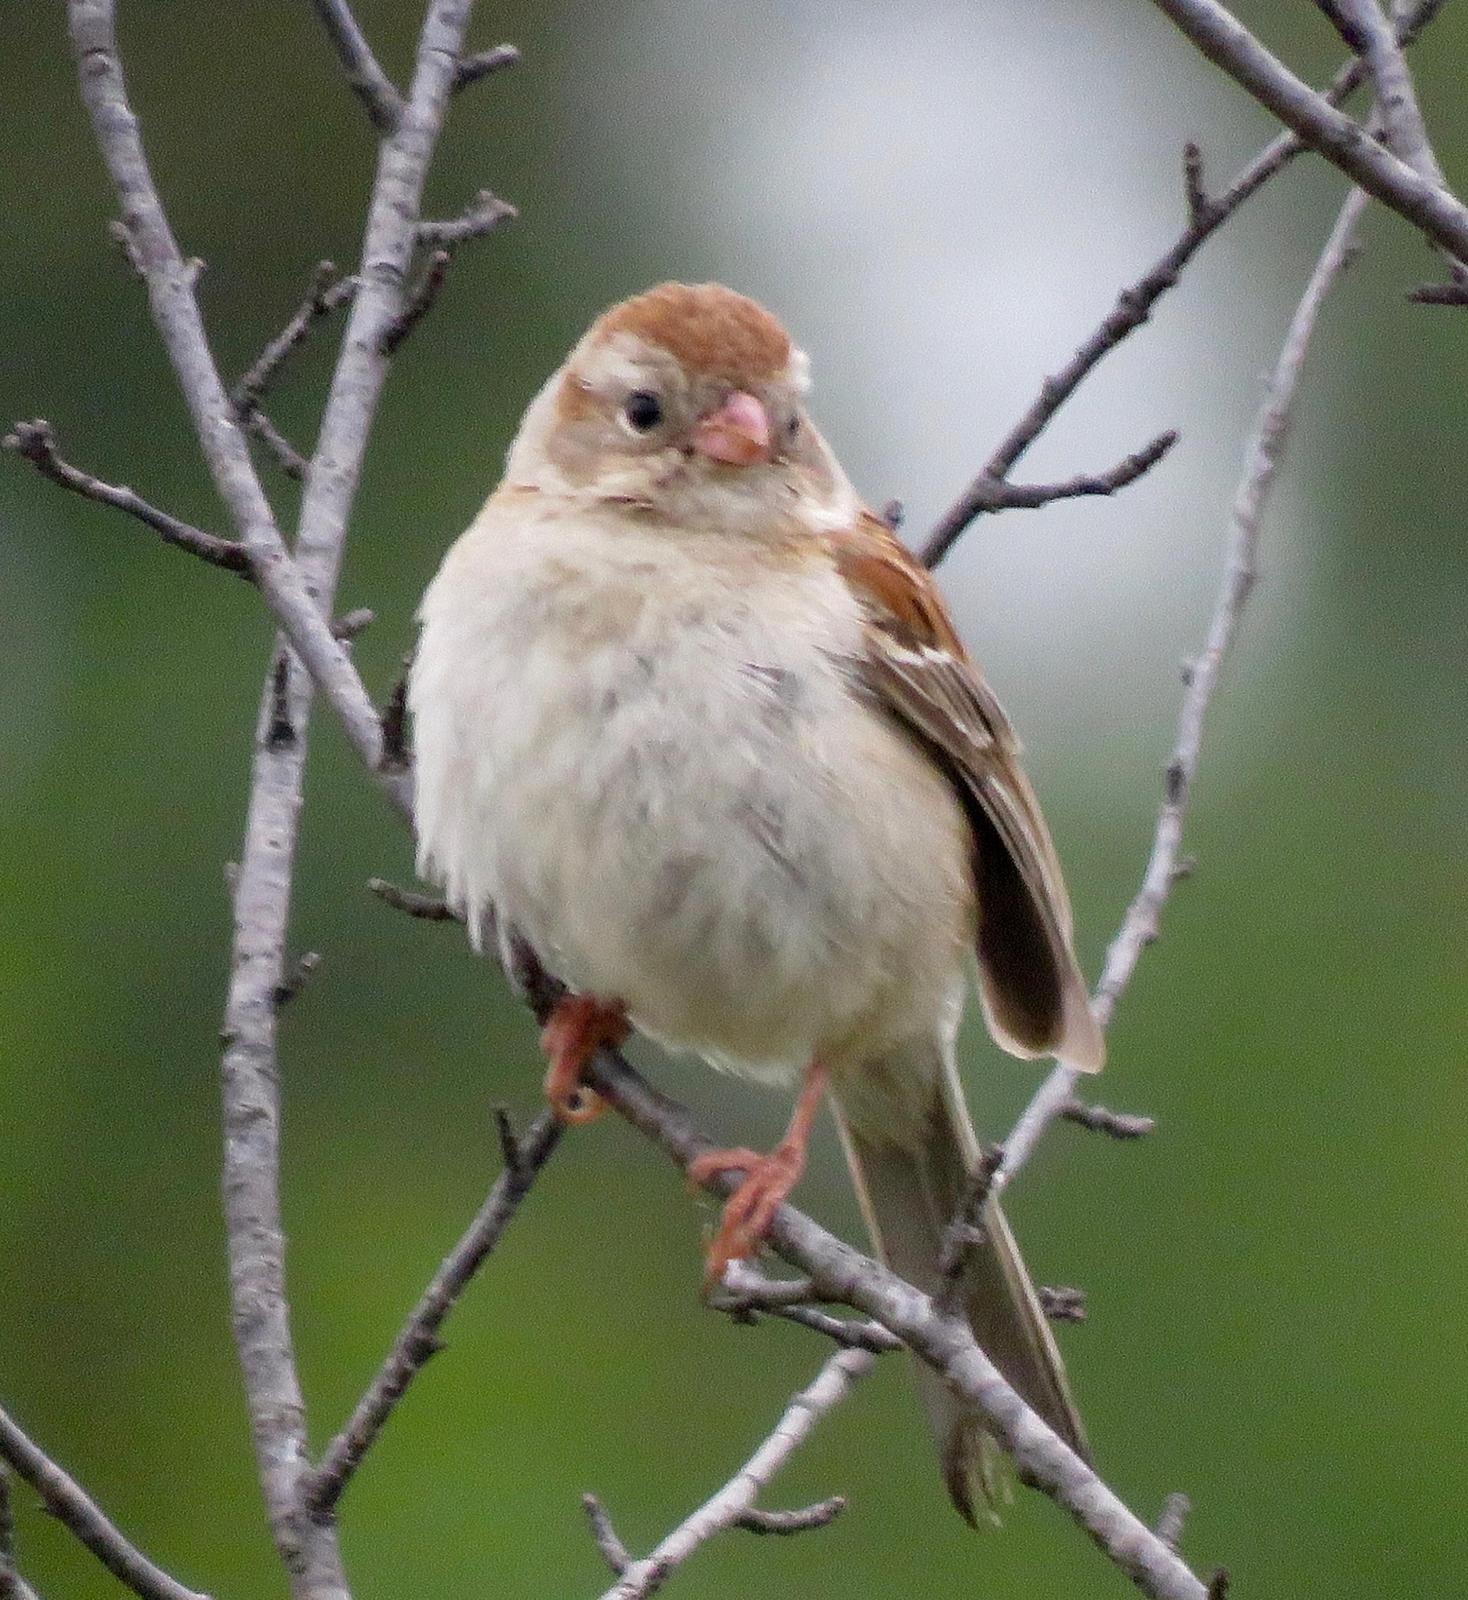 Field Sparrow Photo by Don Glasco